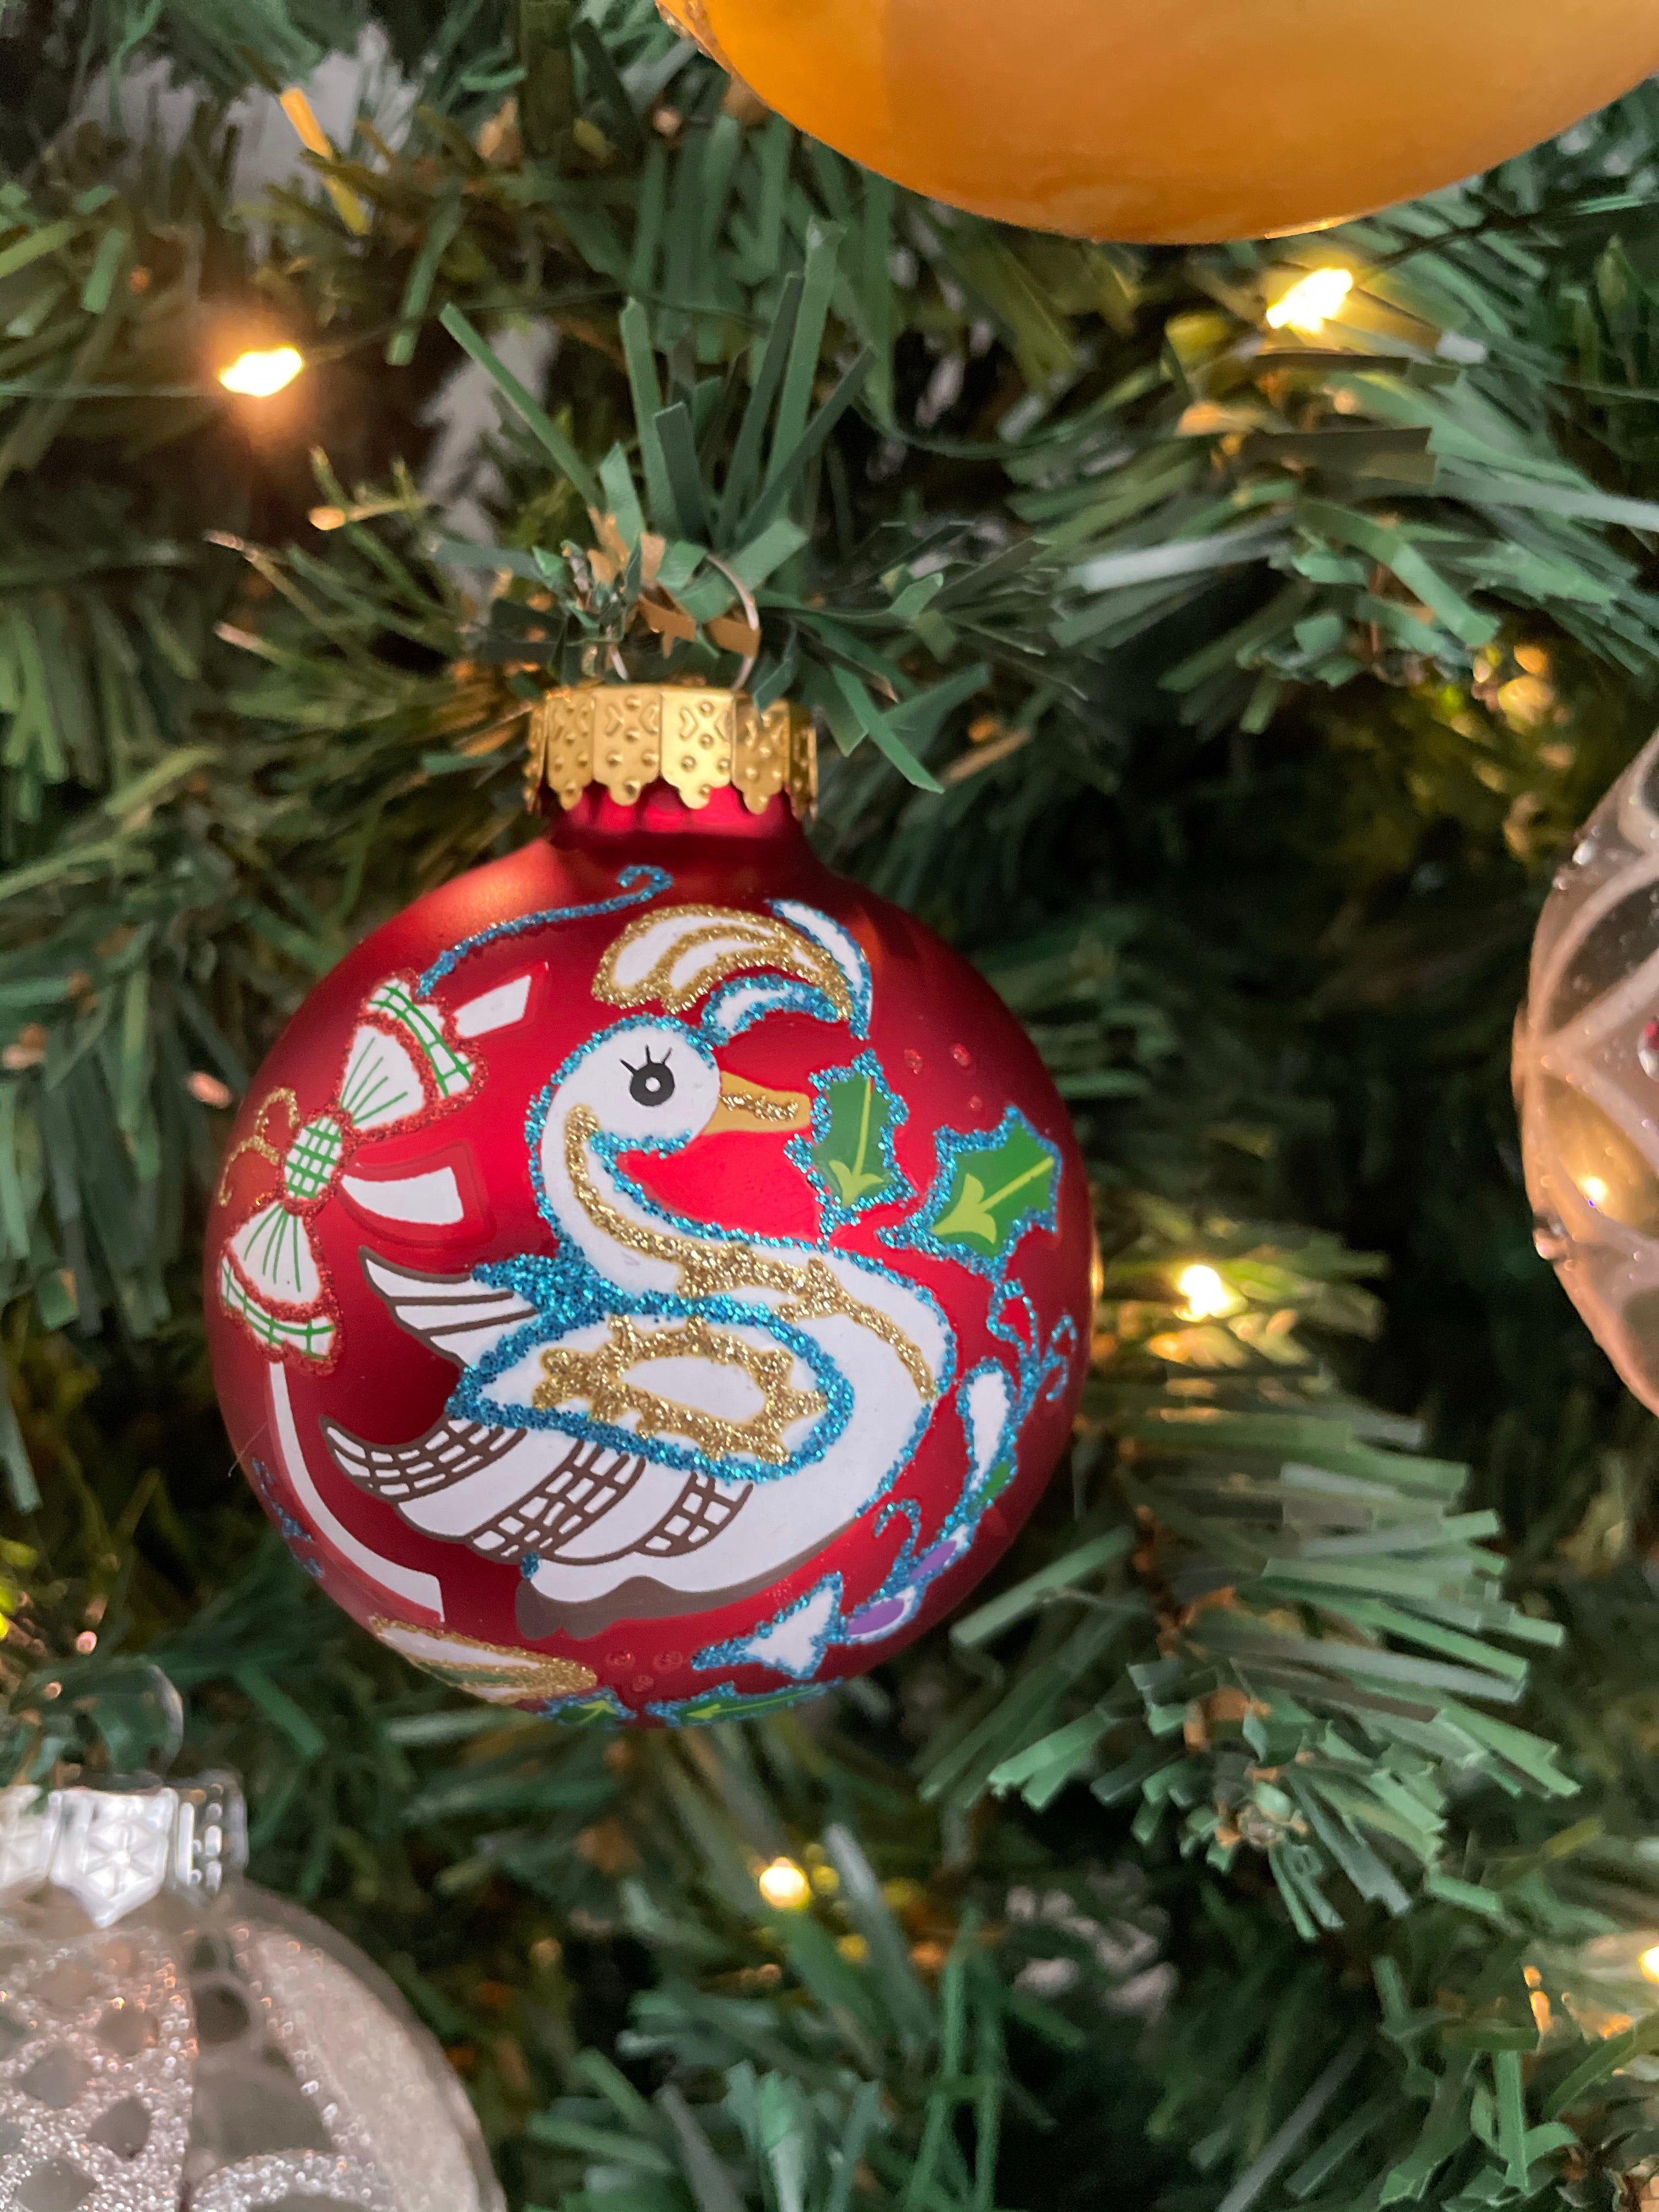 12 days of Christmas Swan bauble